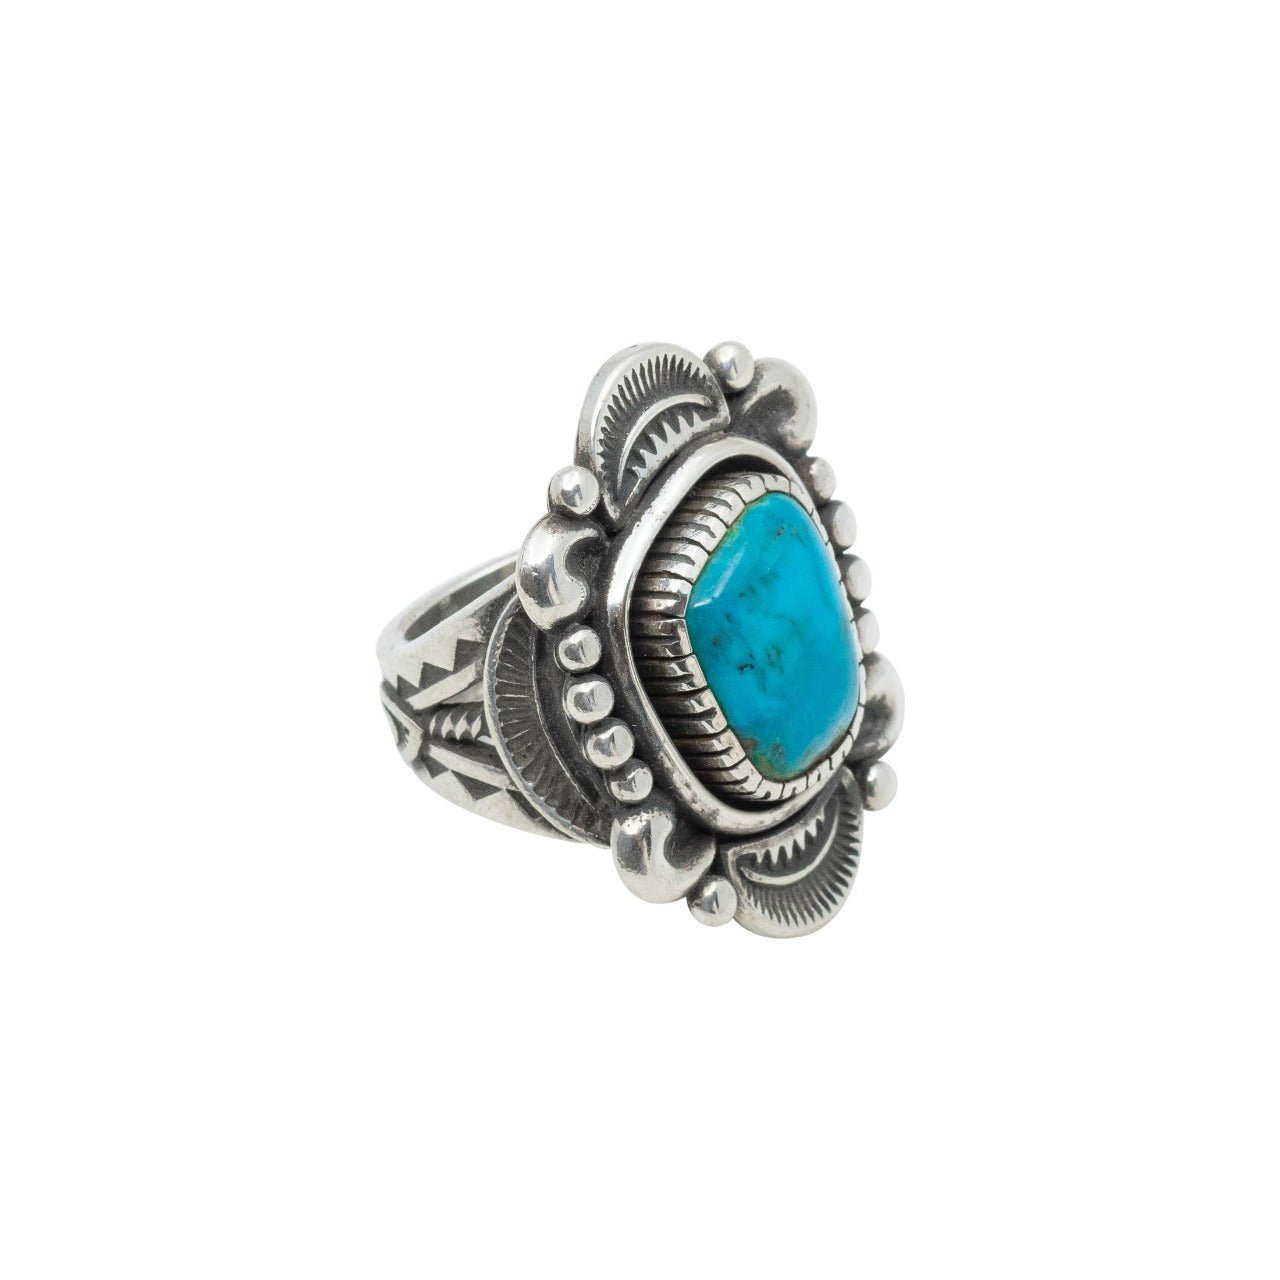 Clendon Pete Ring of Natural Morenci Turquoise - Turquoise & Tufa